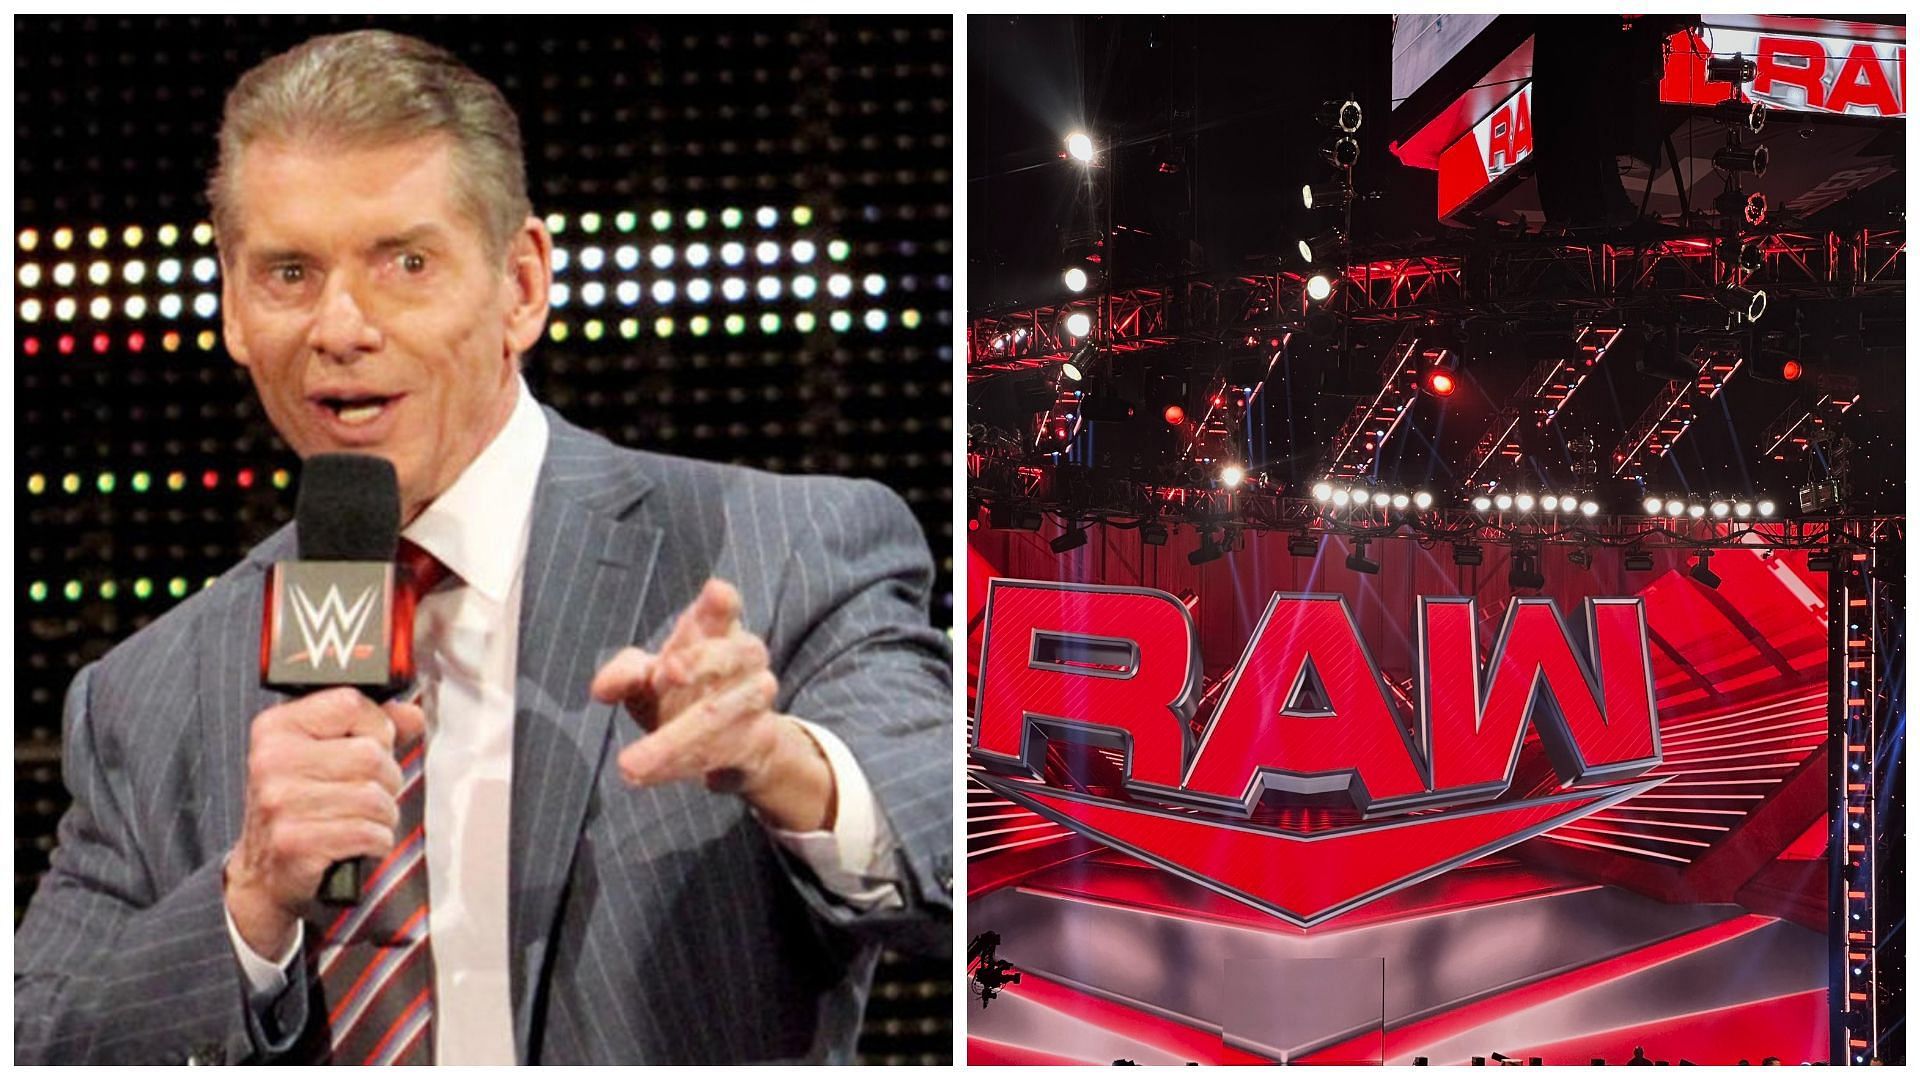 Vince McMahon is the Executive Chairman of WWE.